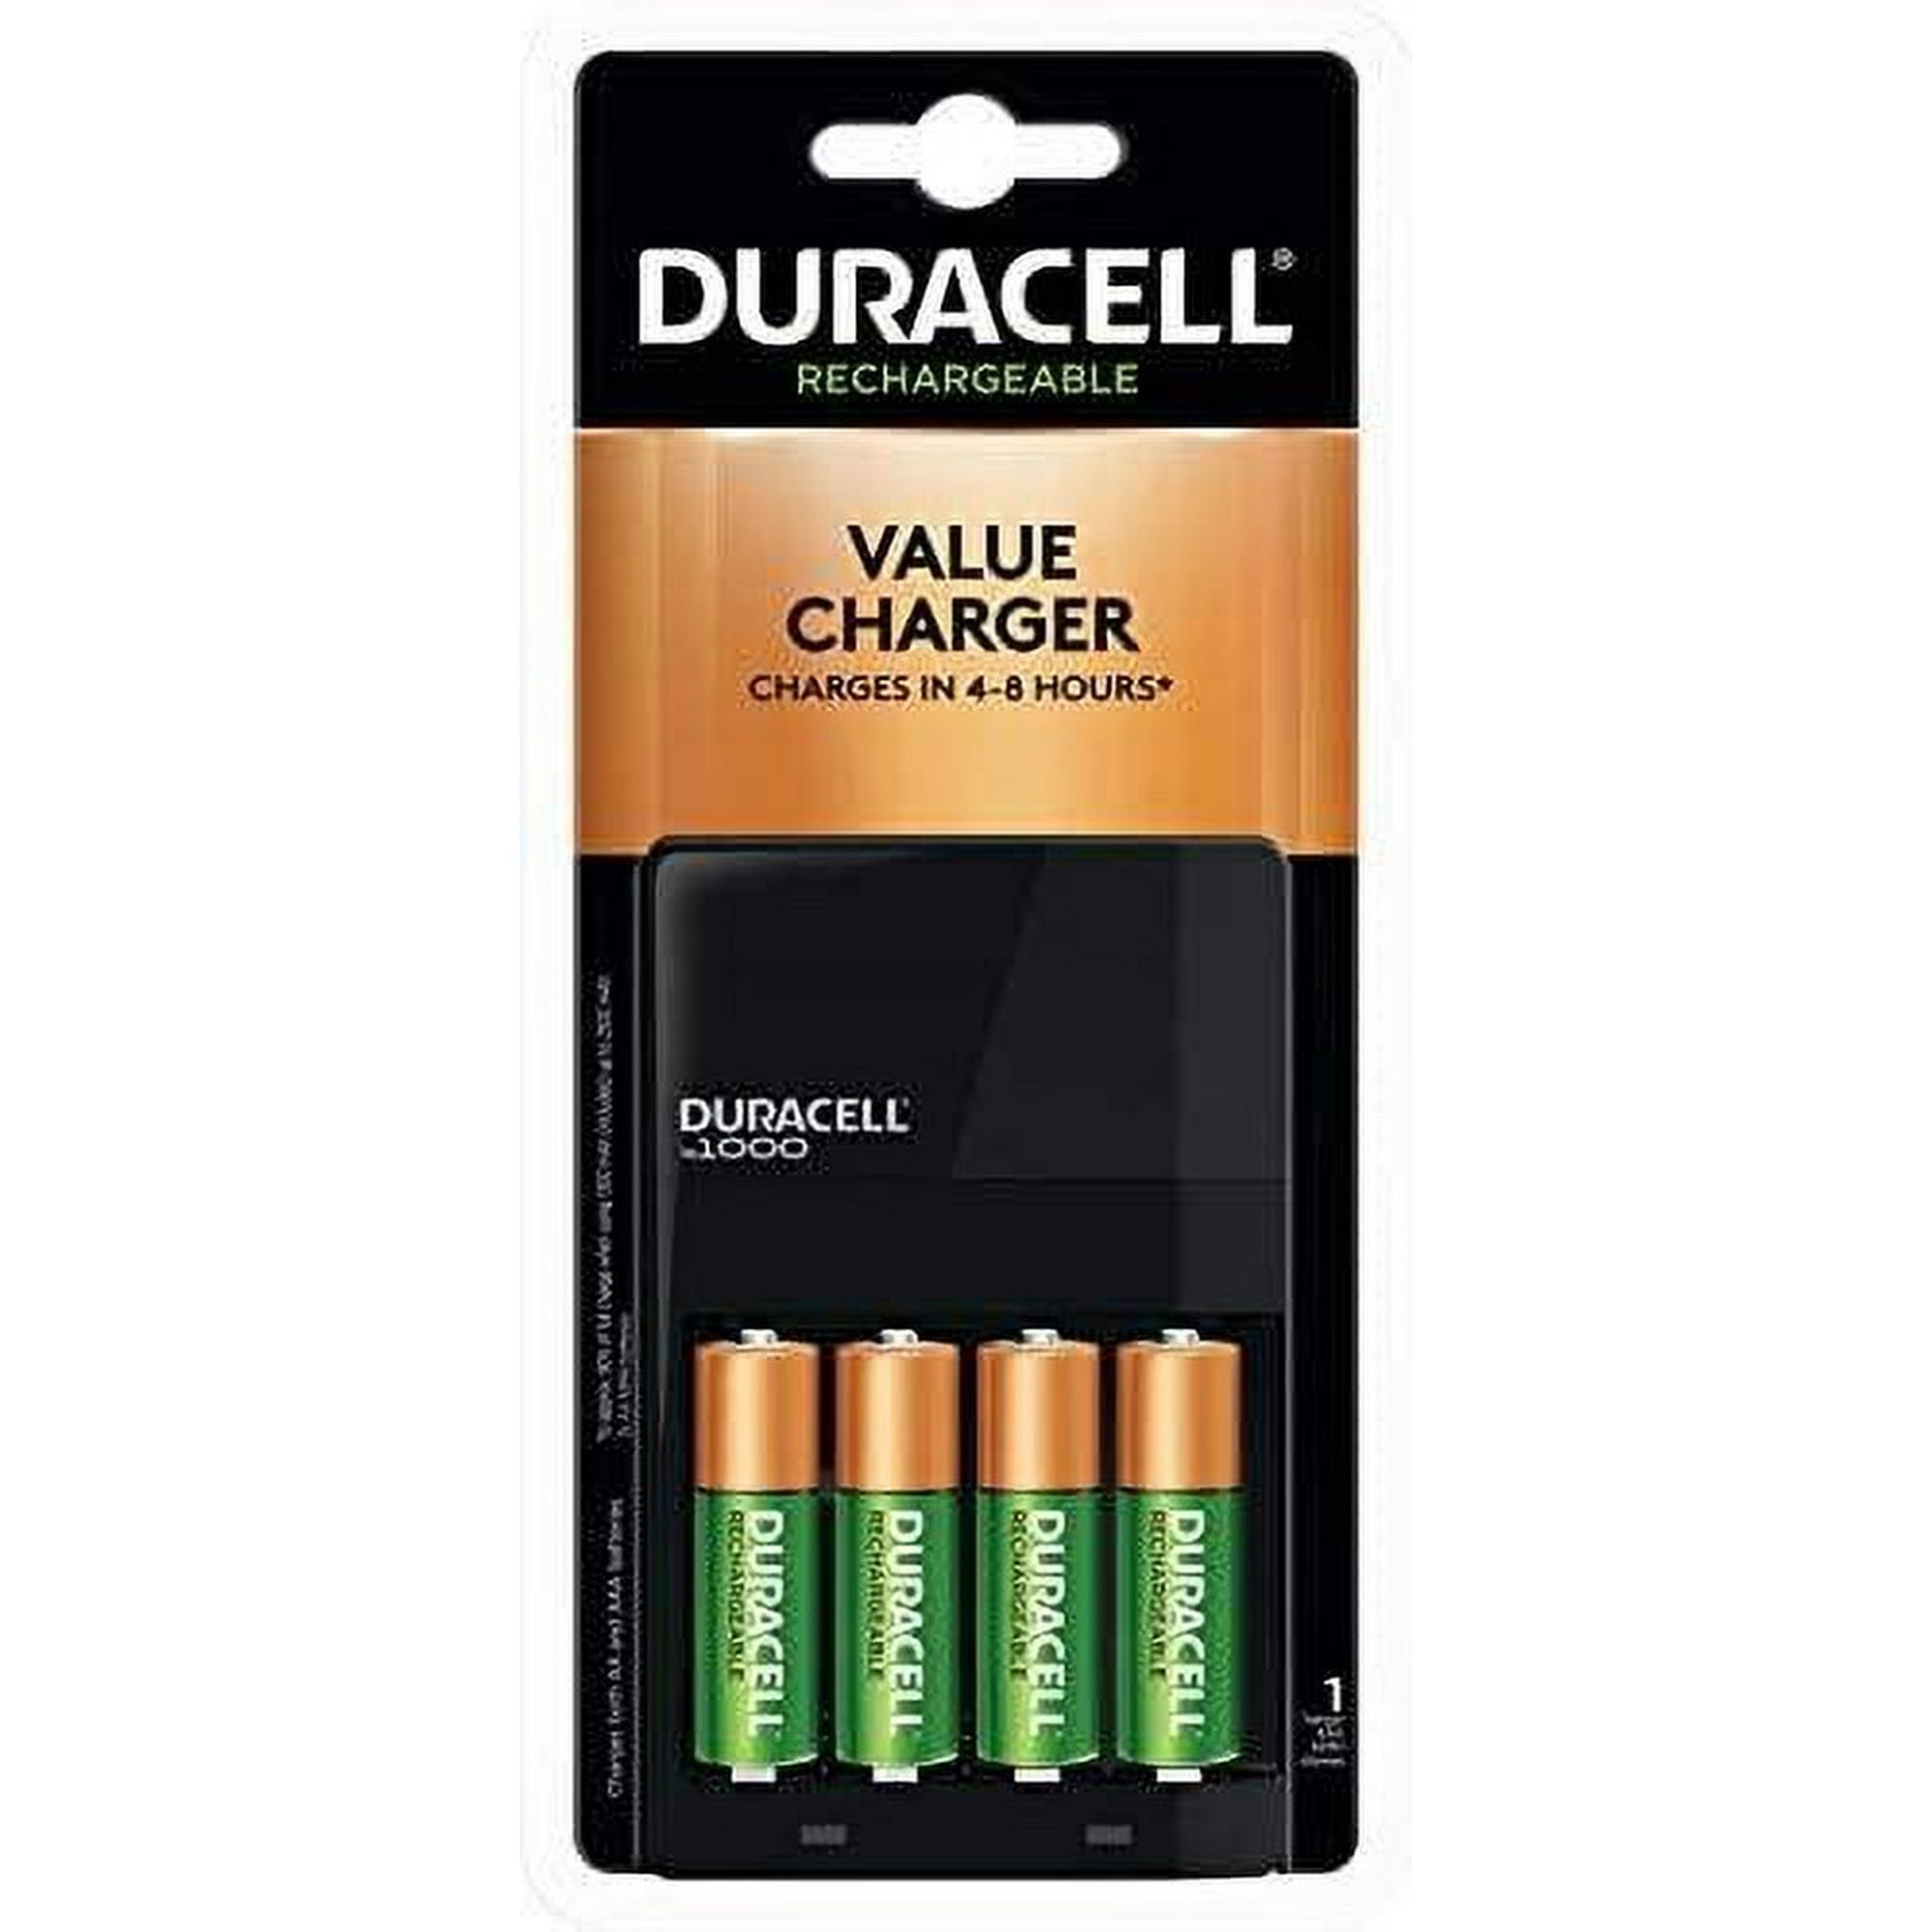 Duracell ION SPEED 1000 Rechargeable Battery Charger, Includes 4 AA NiMH  Batteries 